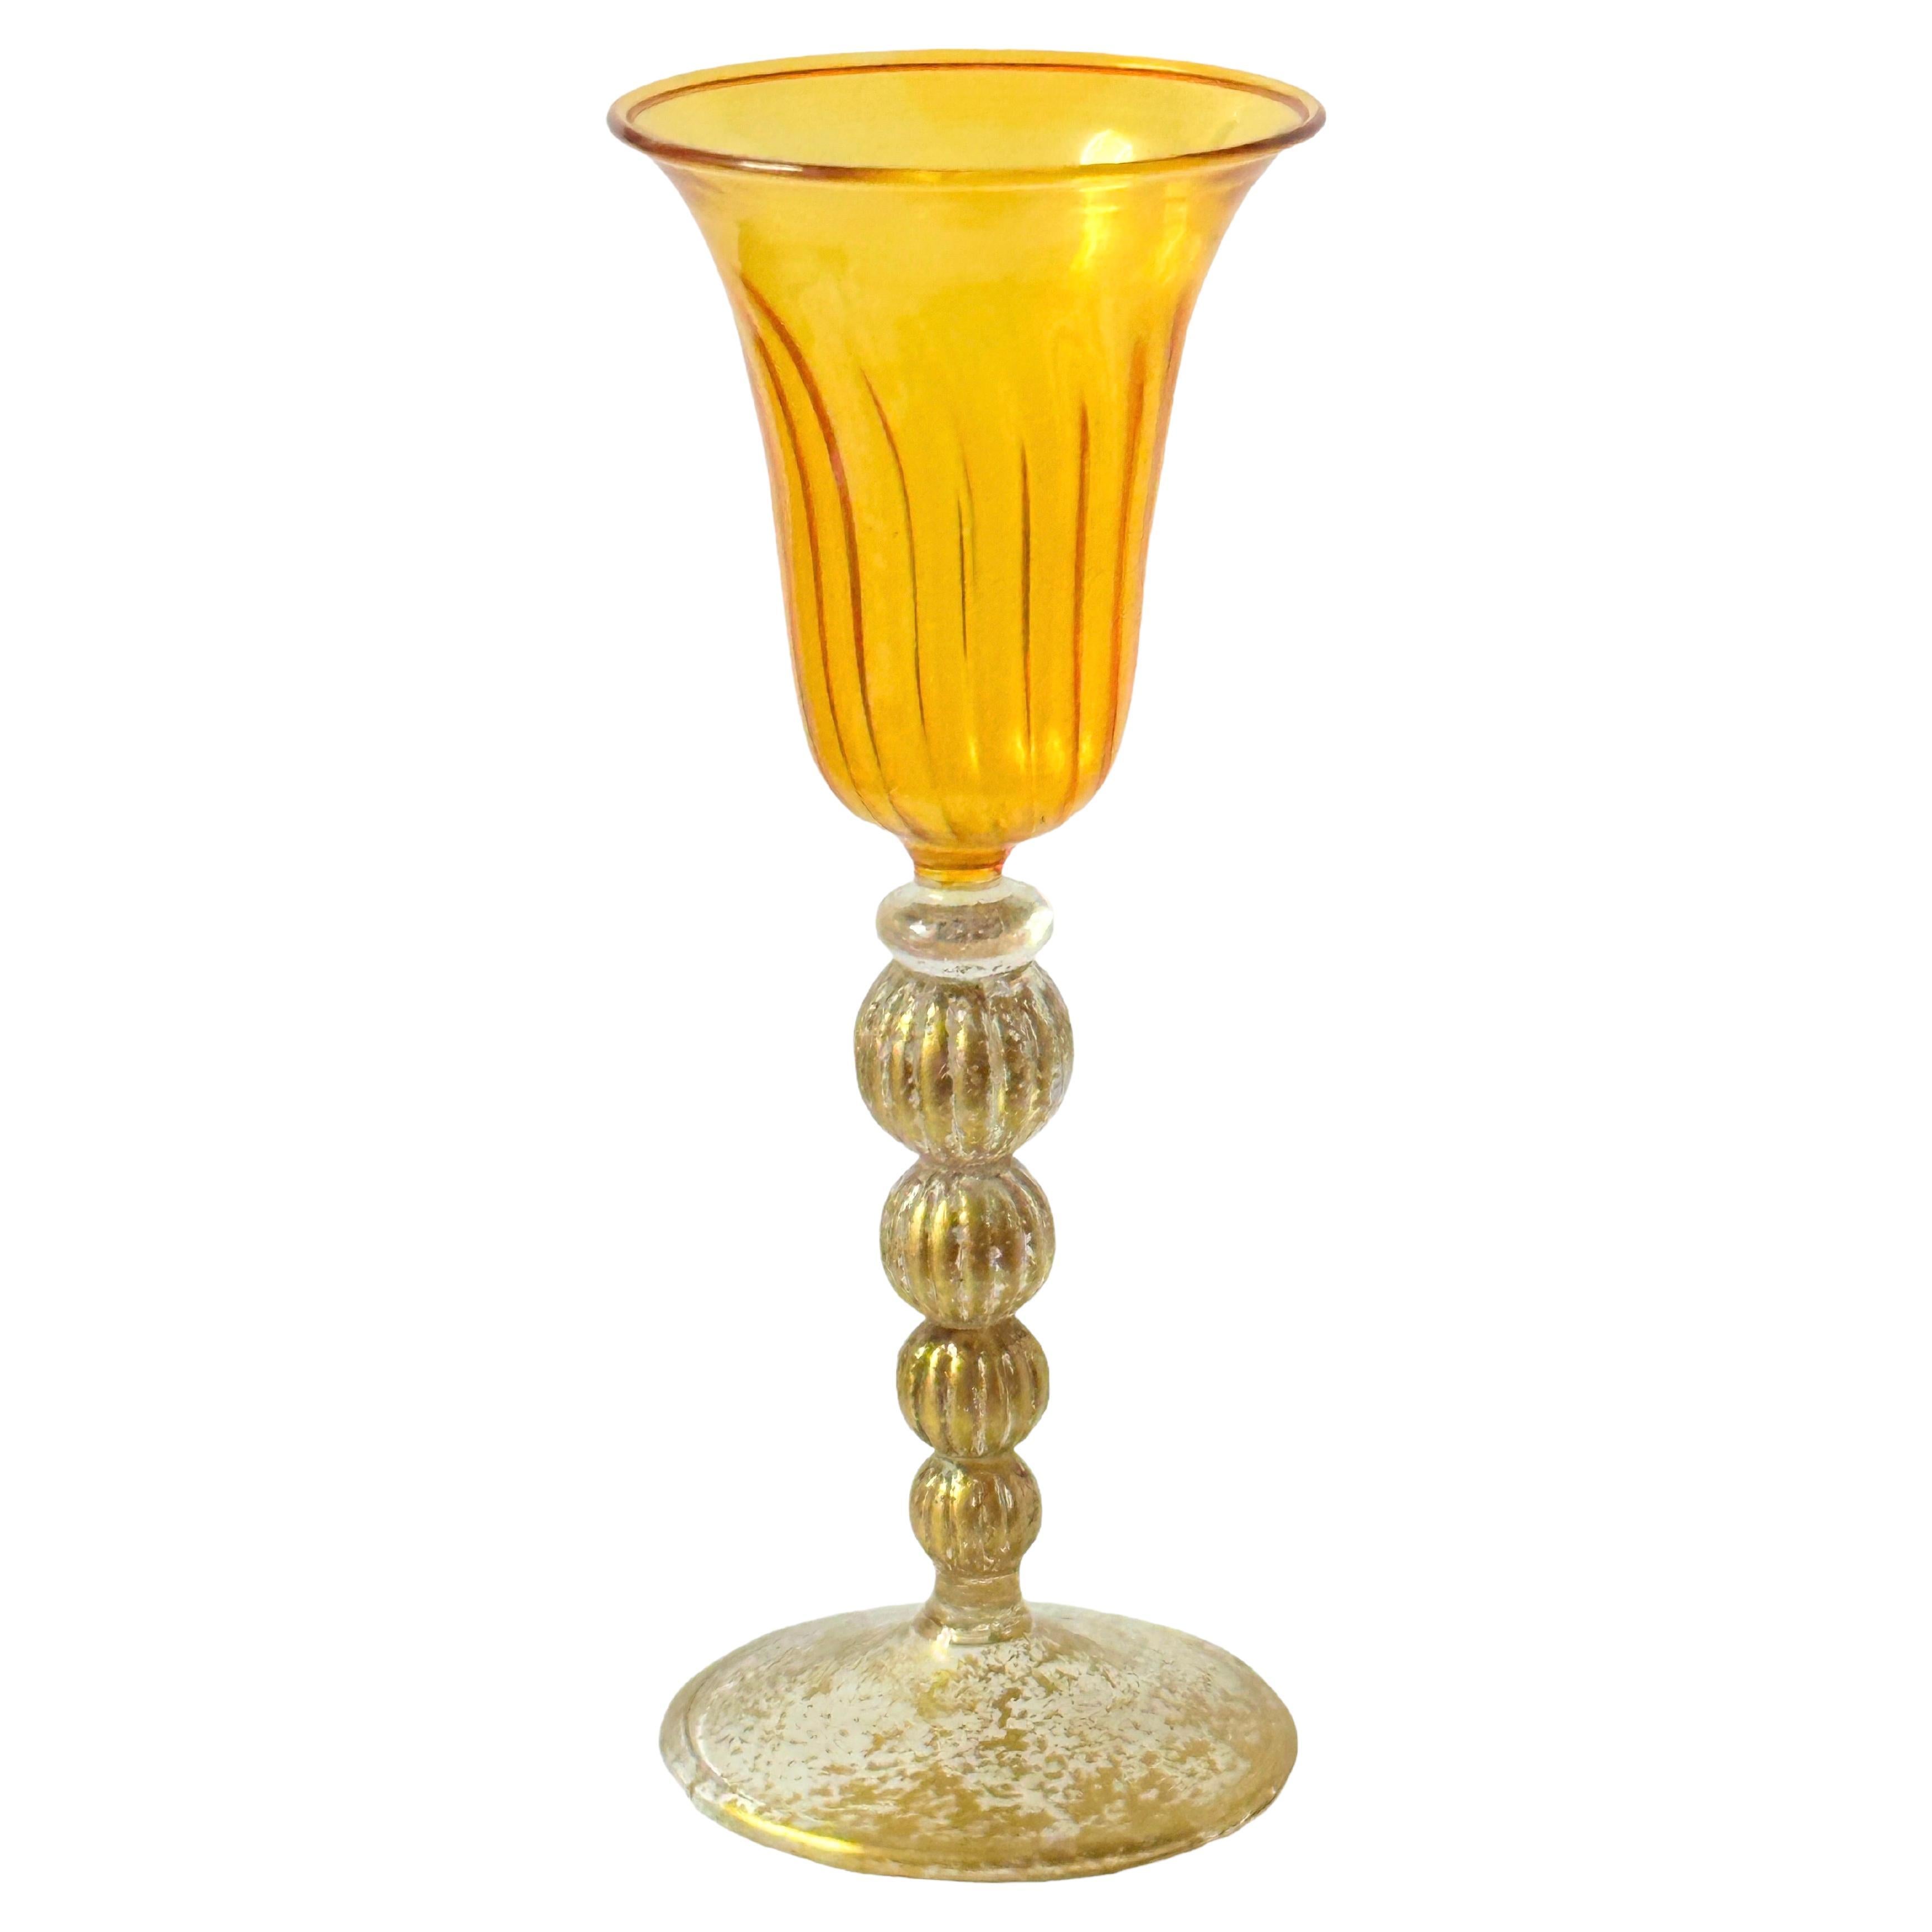 Amber & Gold Stardust Salviati Murano Glass Liqueur Goblet, Vintage Italy  For Sale